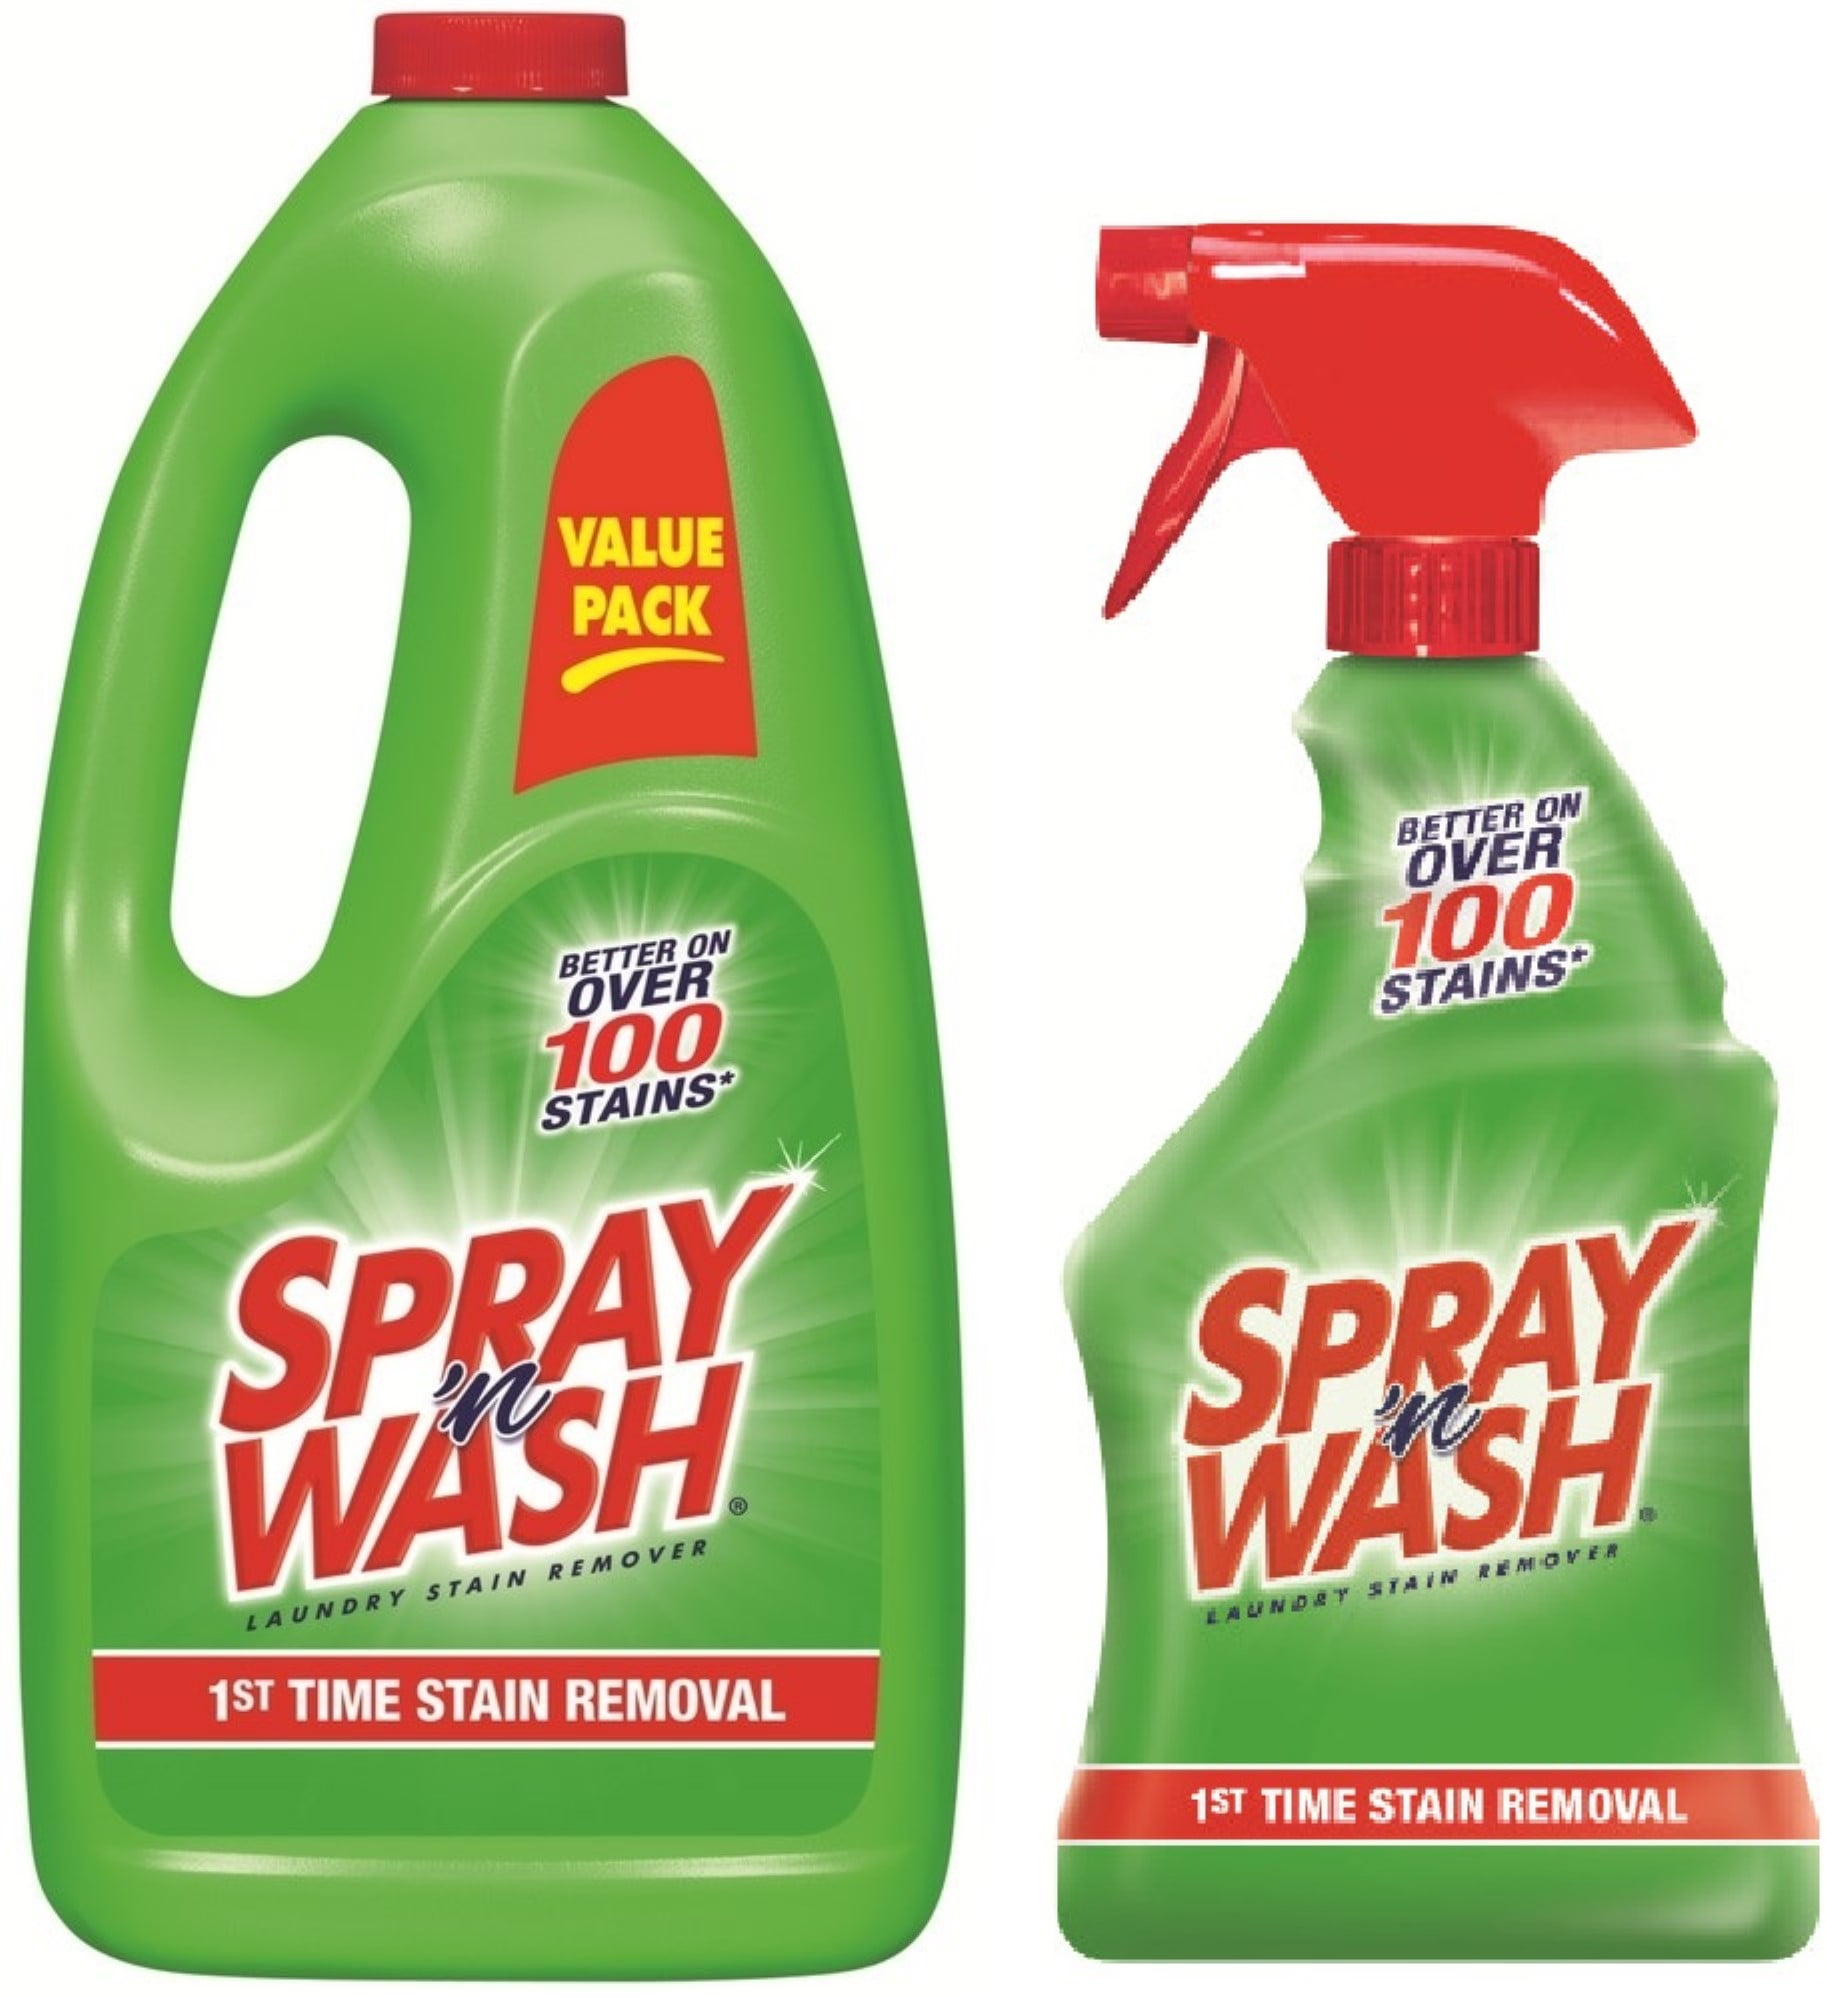  Spray 'n Wash Pre-Treat Laundry Stain Remover, 22 fl oz Bottle  (Pack of 2) : Health & Household